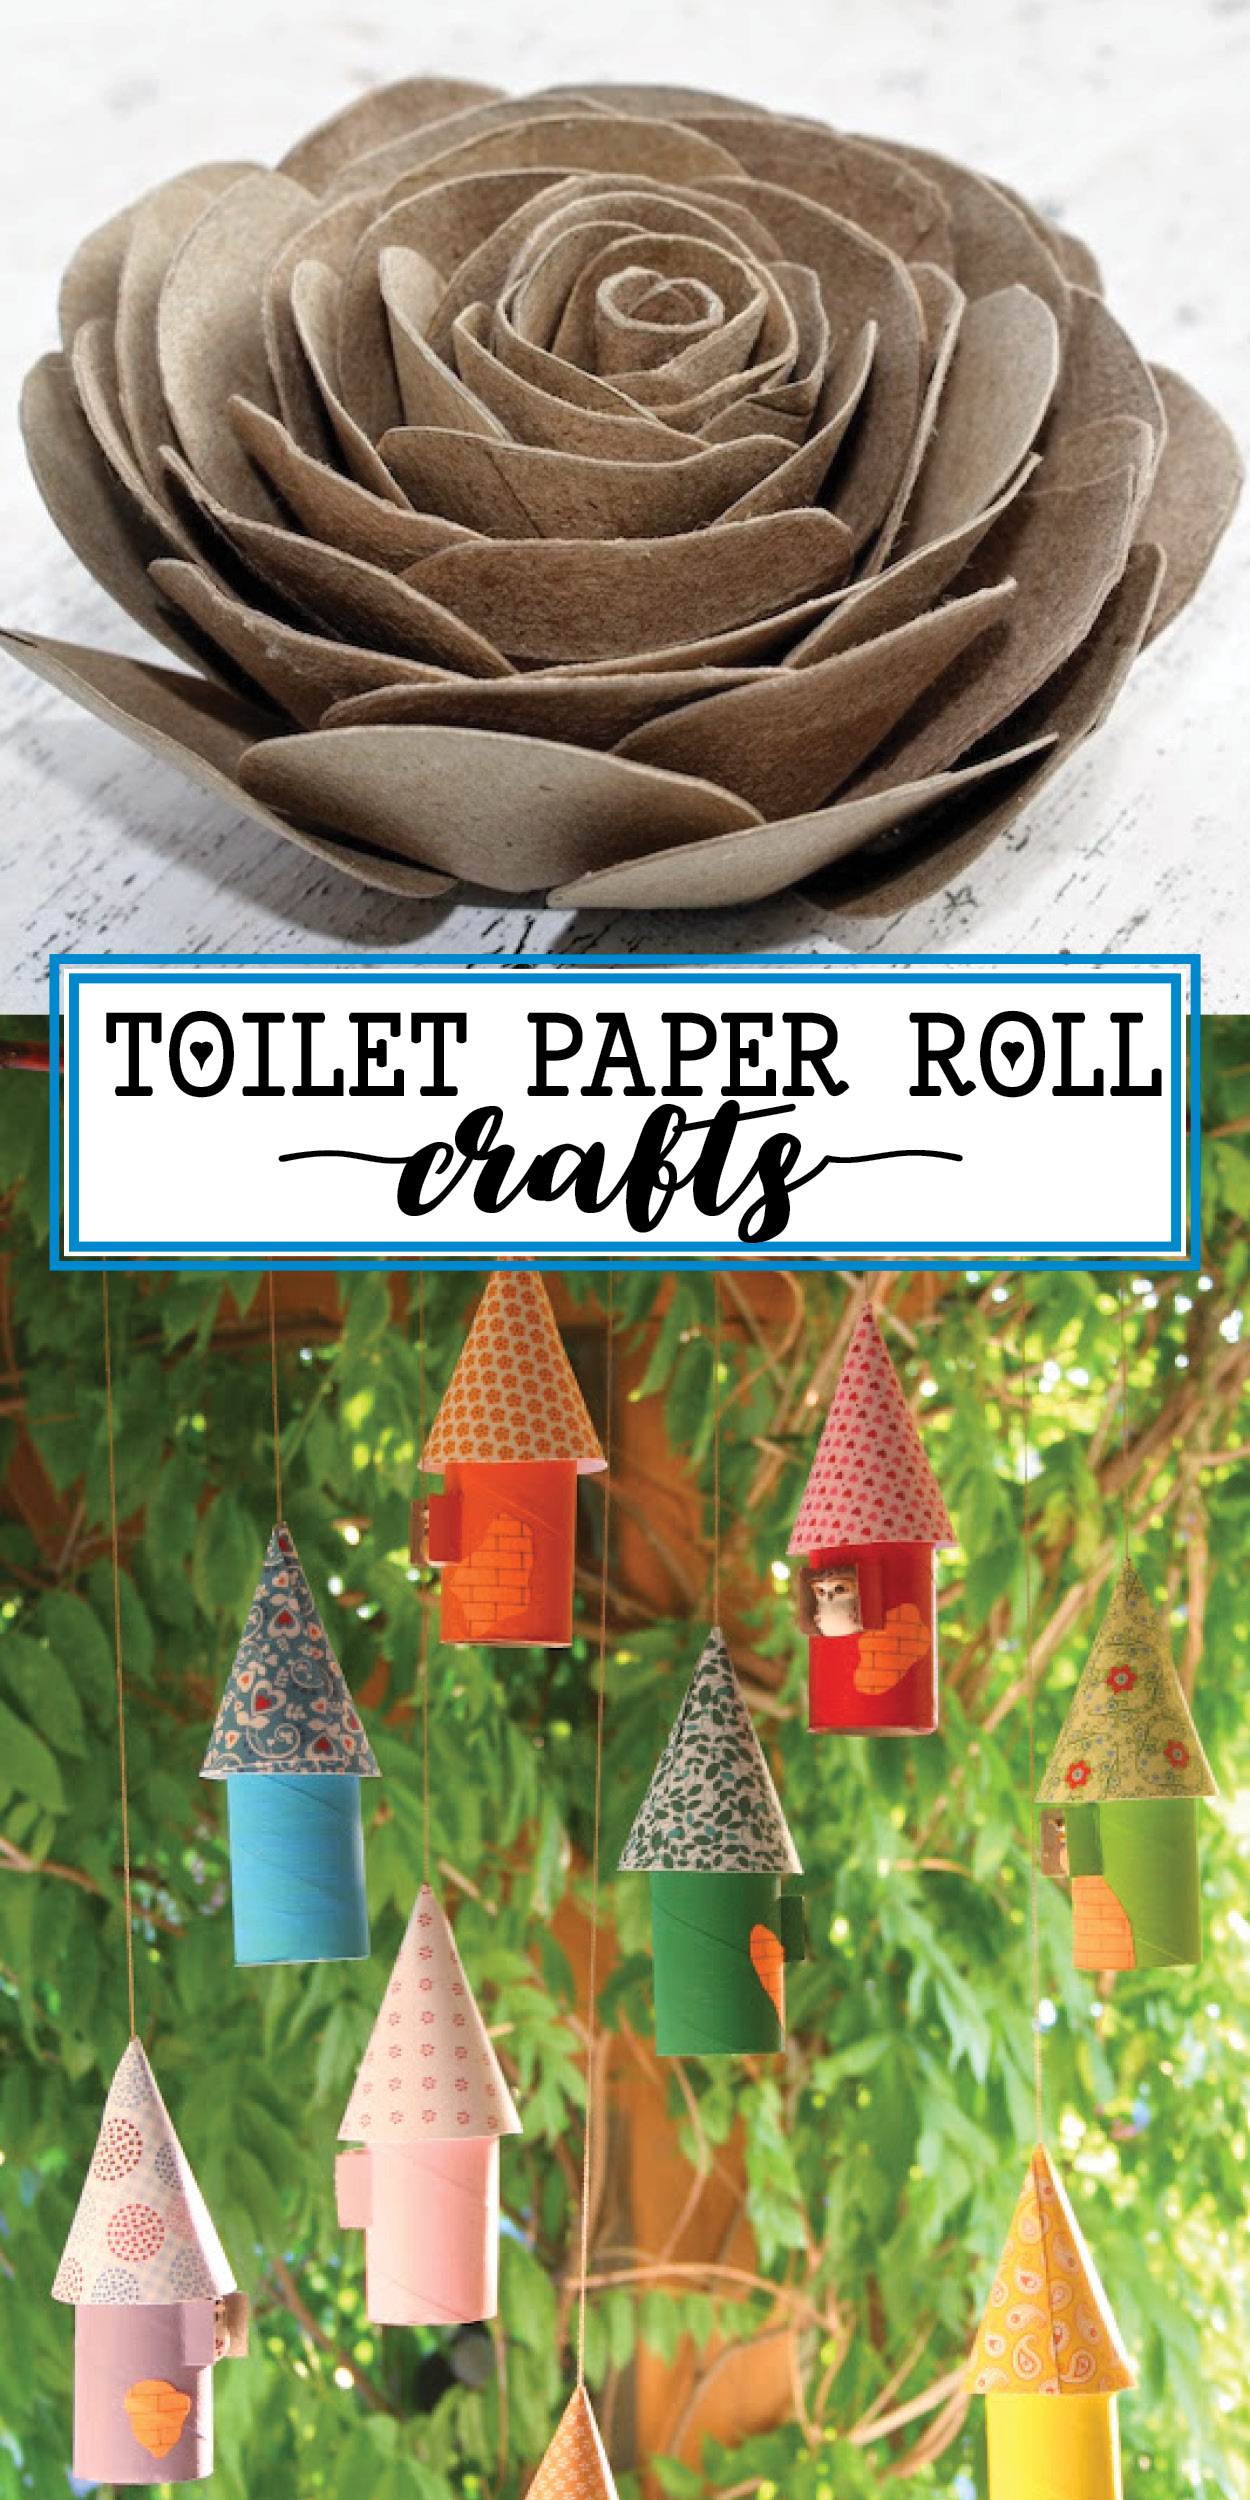 Toilet Paper Roll Crafts